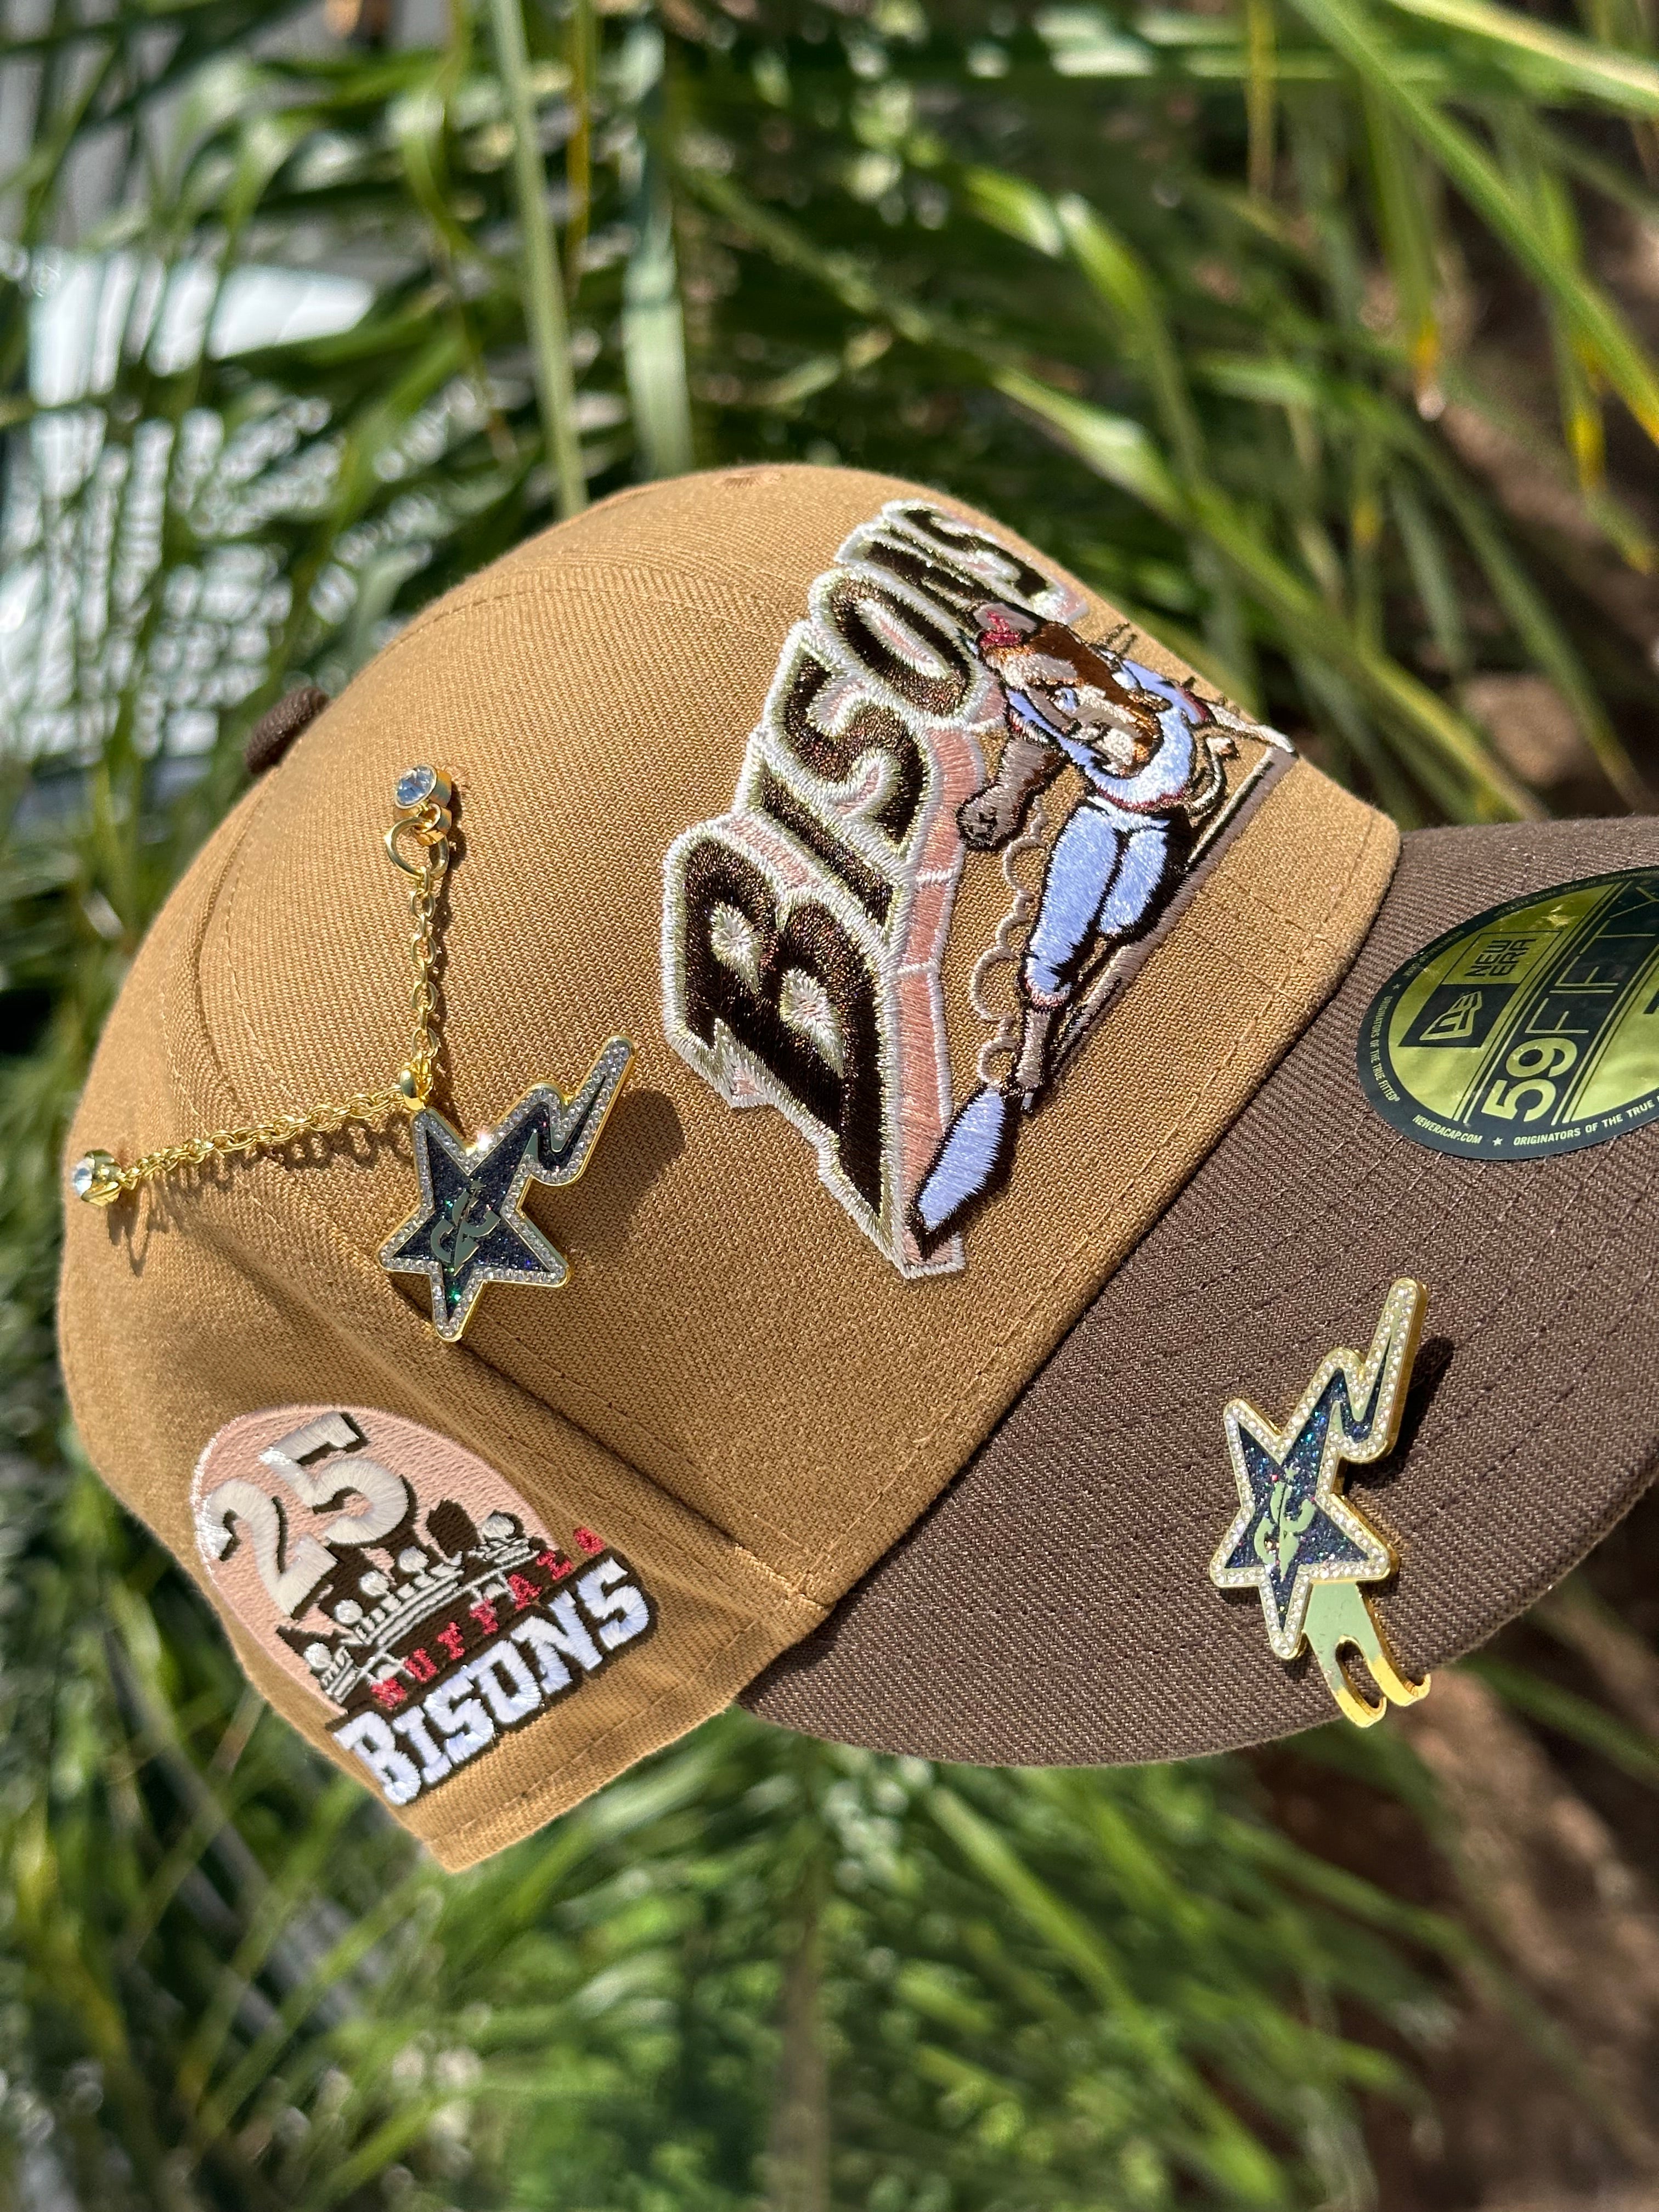 NEW ERA EXCLUSIVE 59FIFTY TAN/WALNUT BUFFALO BISONS W/ 25TH ANNIVERSARY PATCH